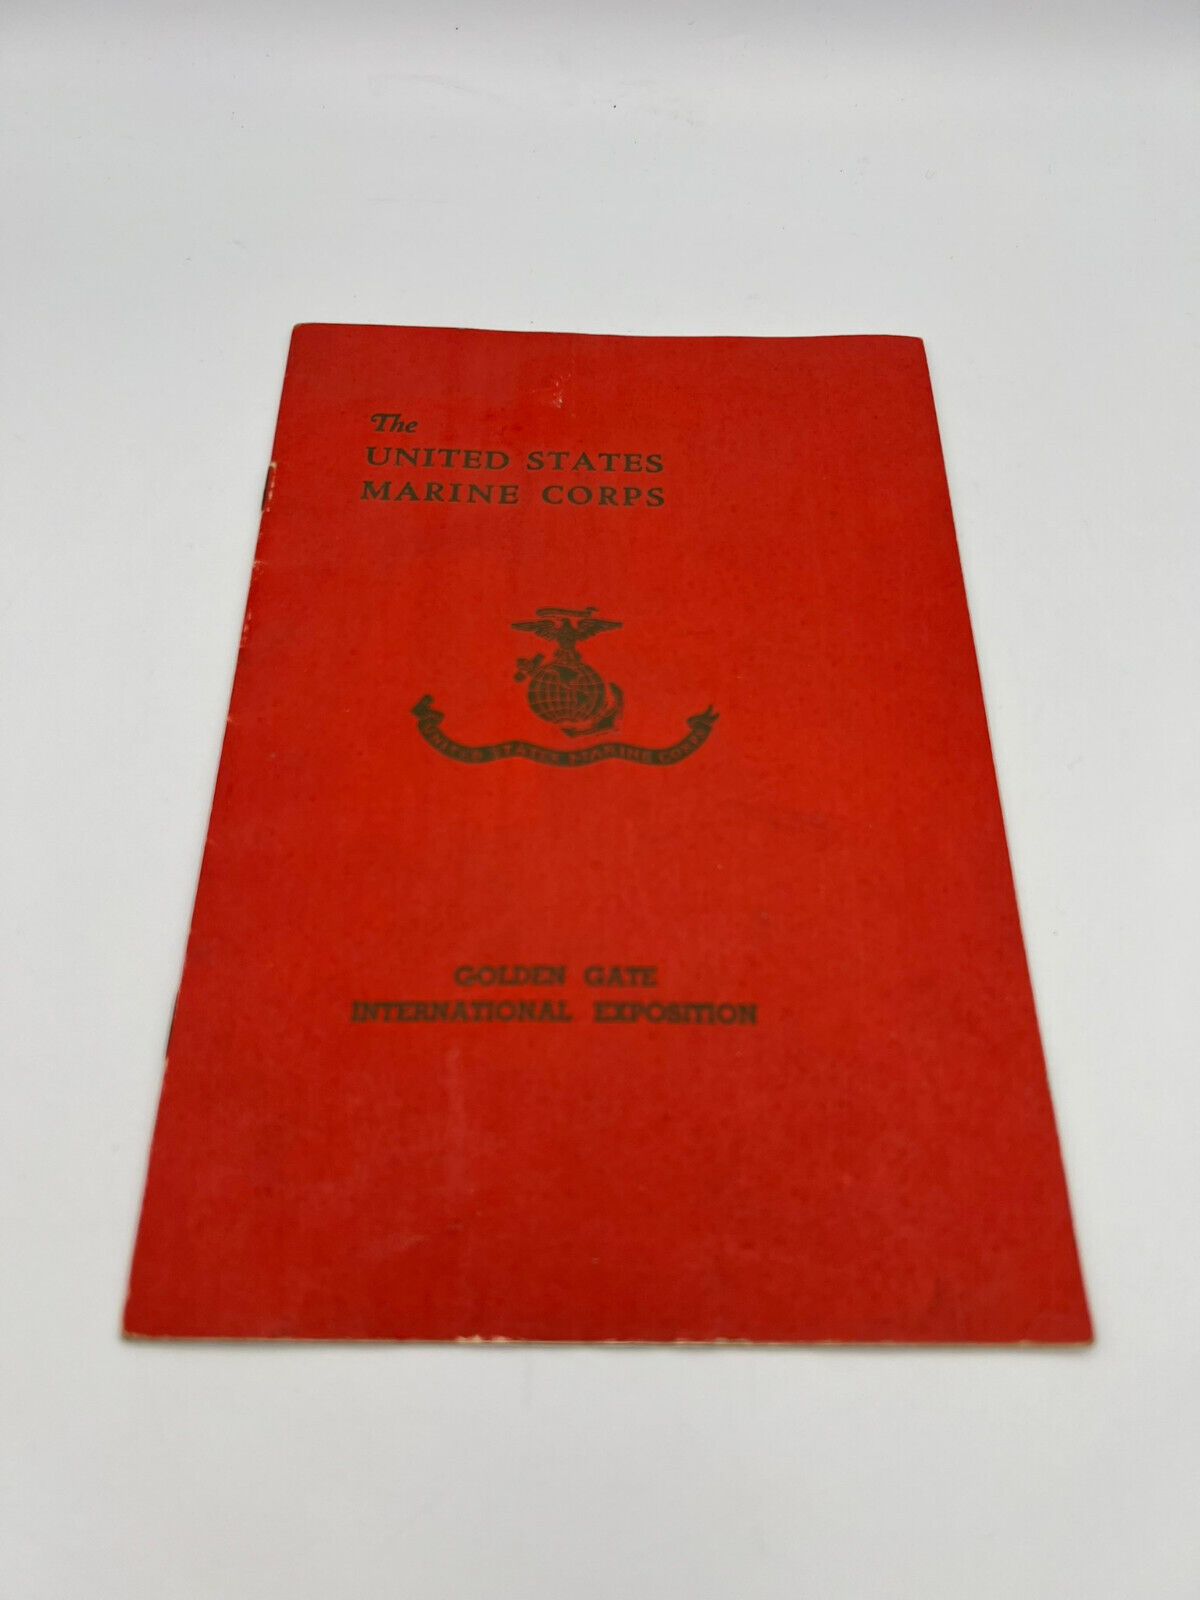 Vintage The United States Marine Corps Golden Gate Int. Expo Brochure T.I. 1940